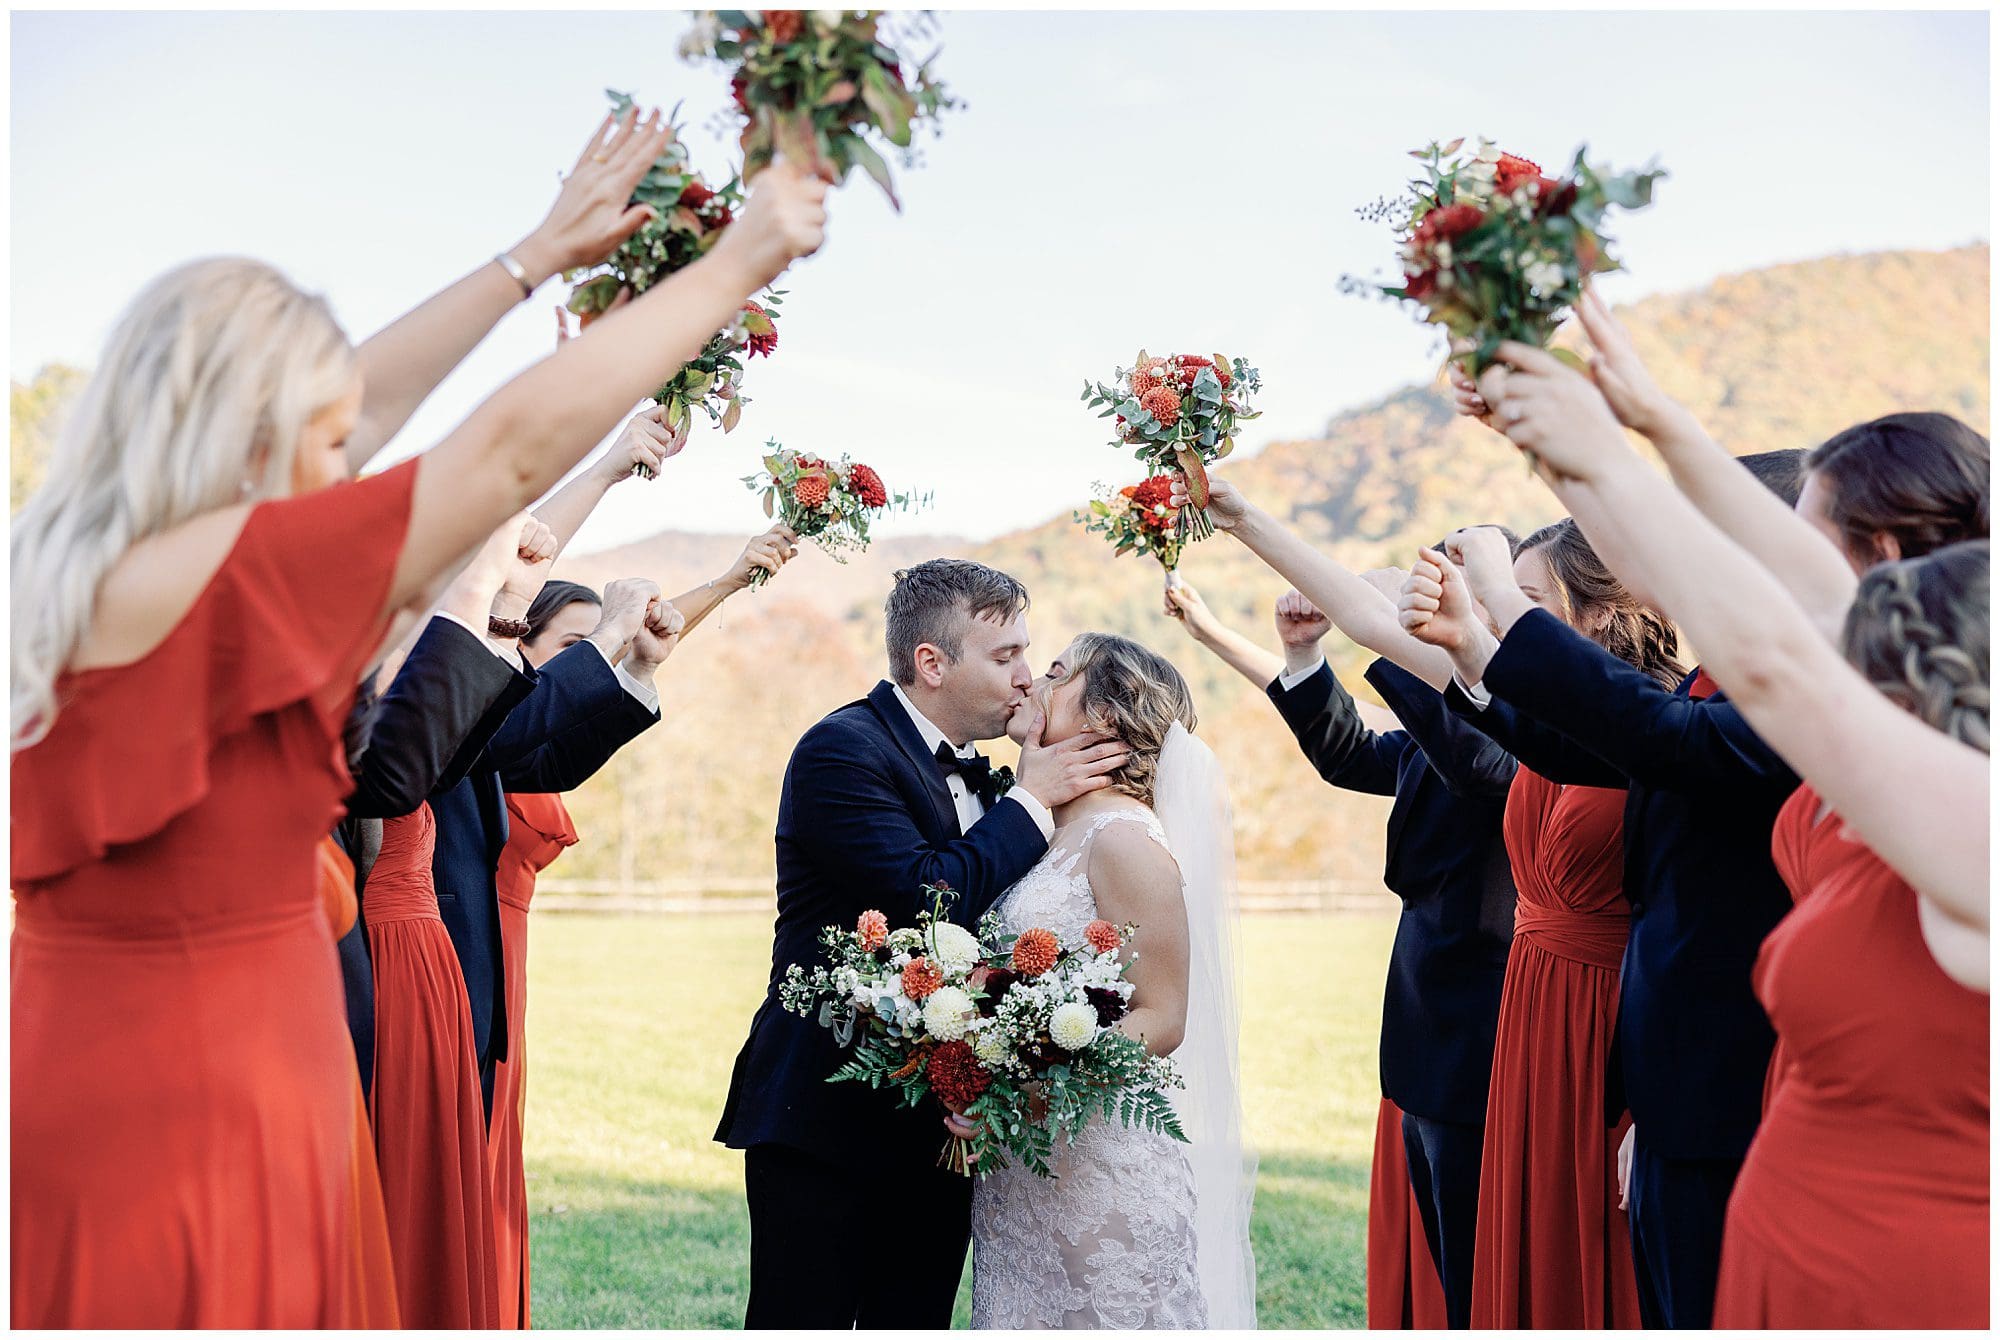 Bride and groom kissing under an arch formed by guests' raised arms holding bouquets, with a scenic mountain backdrop.